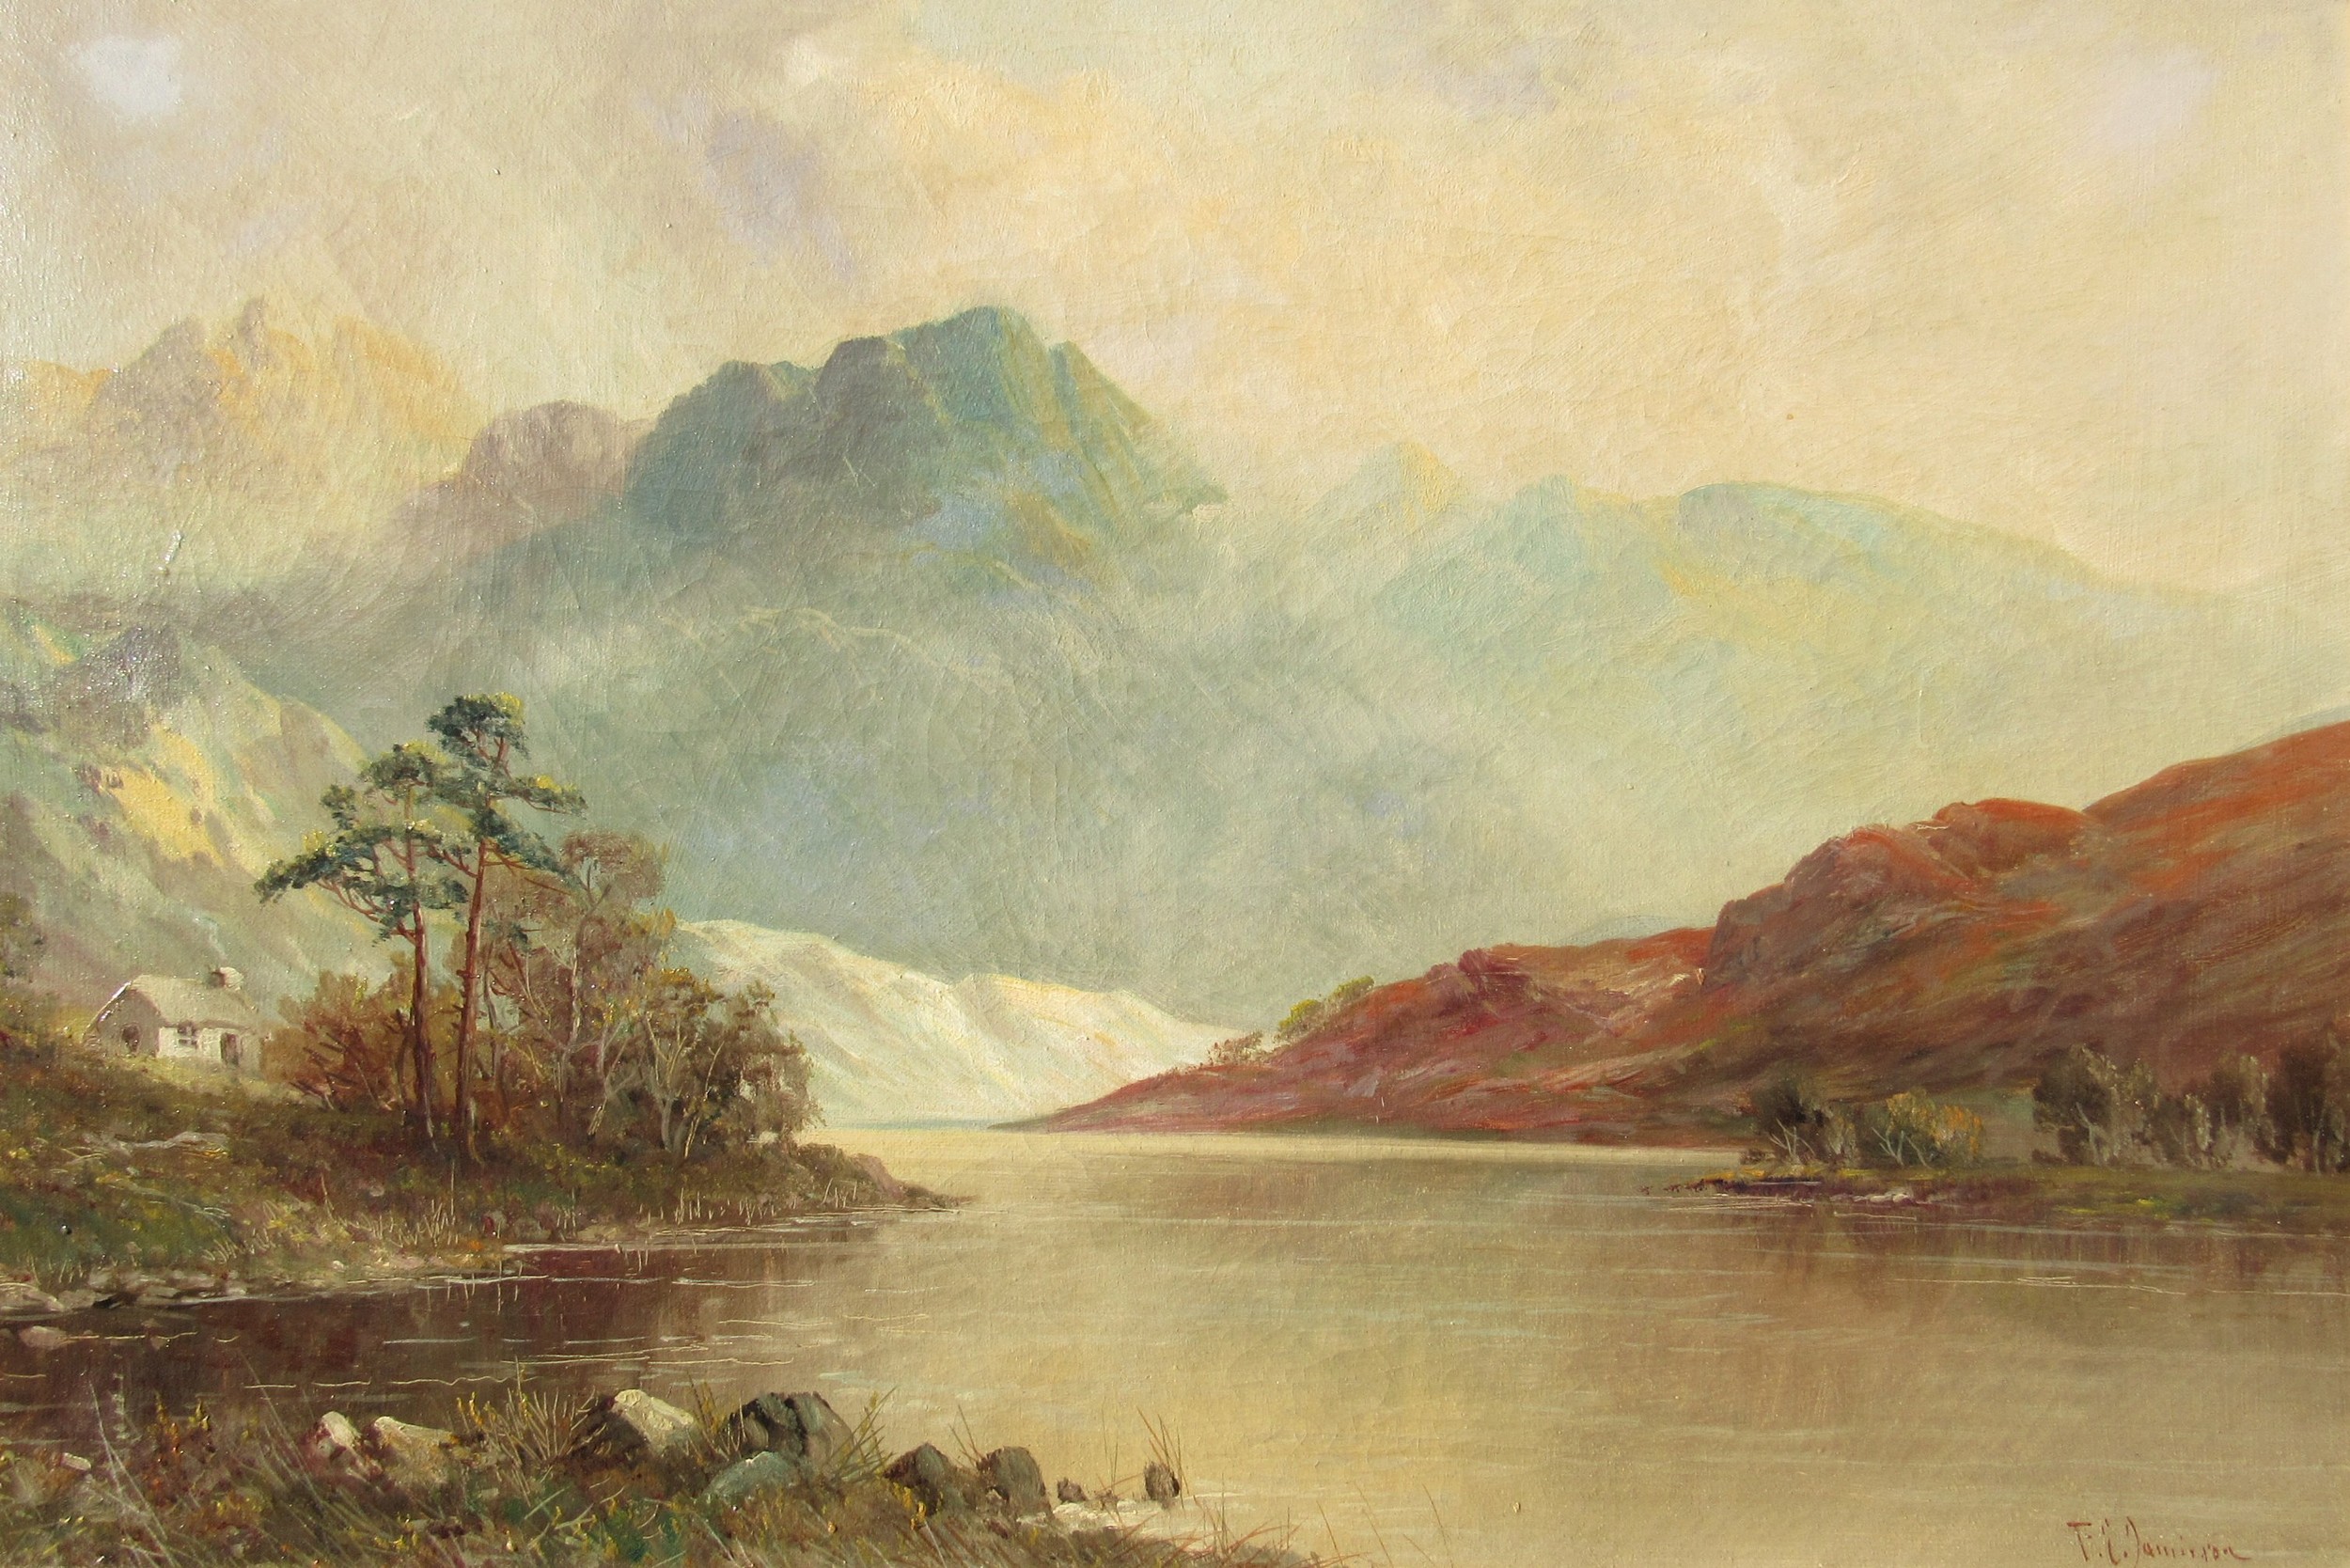 FRANCIS EDWARD JAMIESON (1895-1950) An oil on canvas depicting a scene at 'Loch Earn, Perthshire, - Image 2 of 5